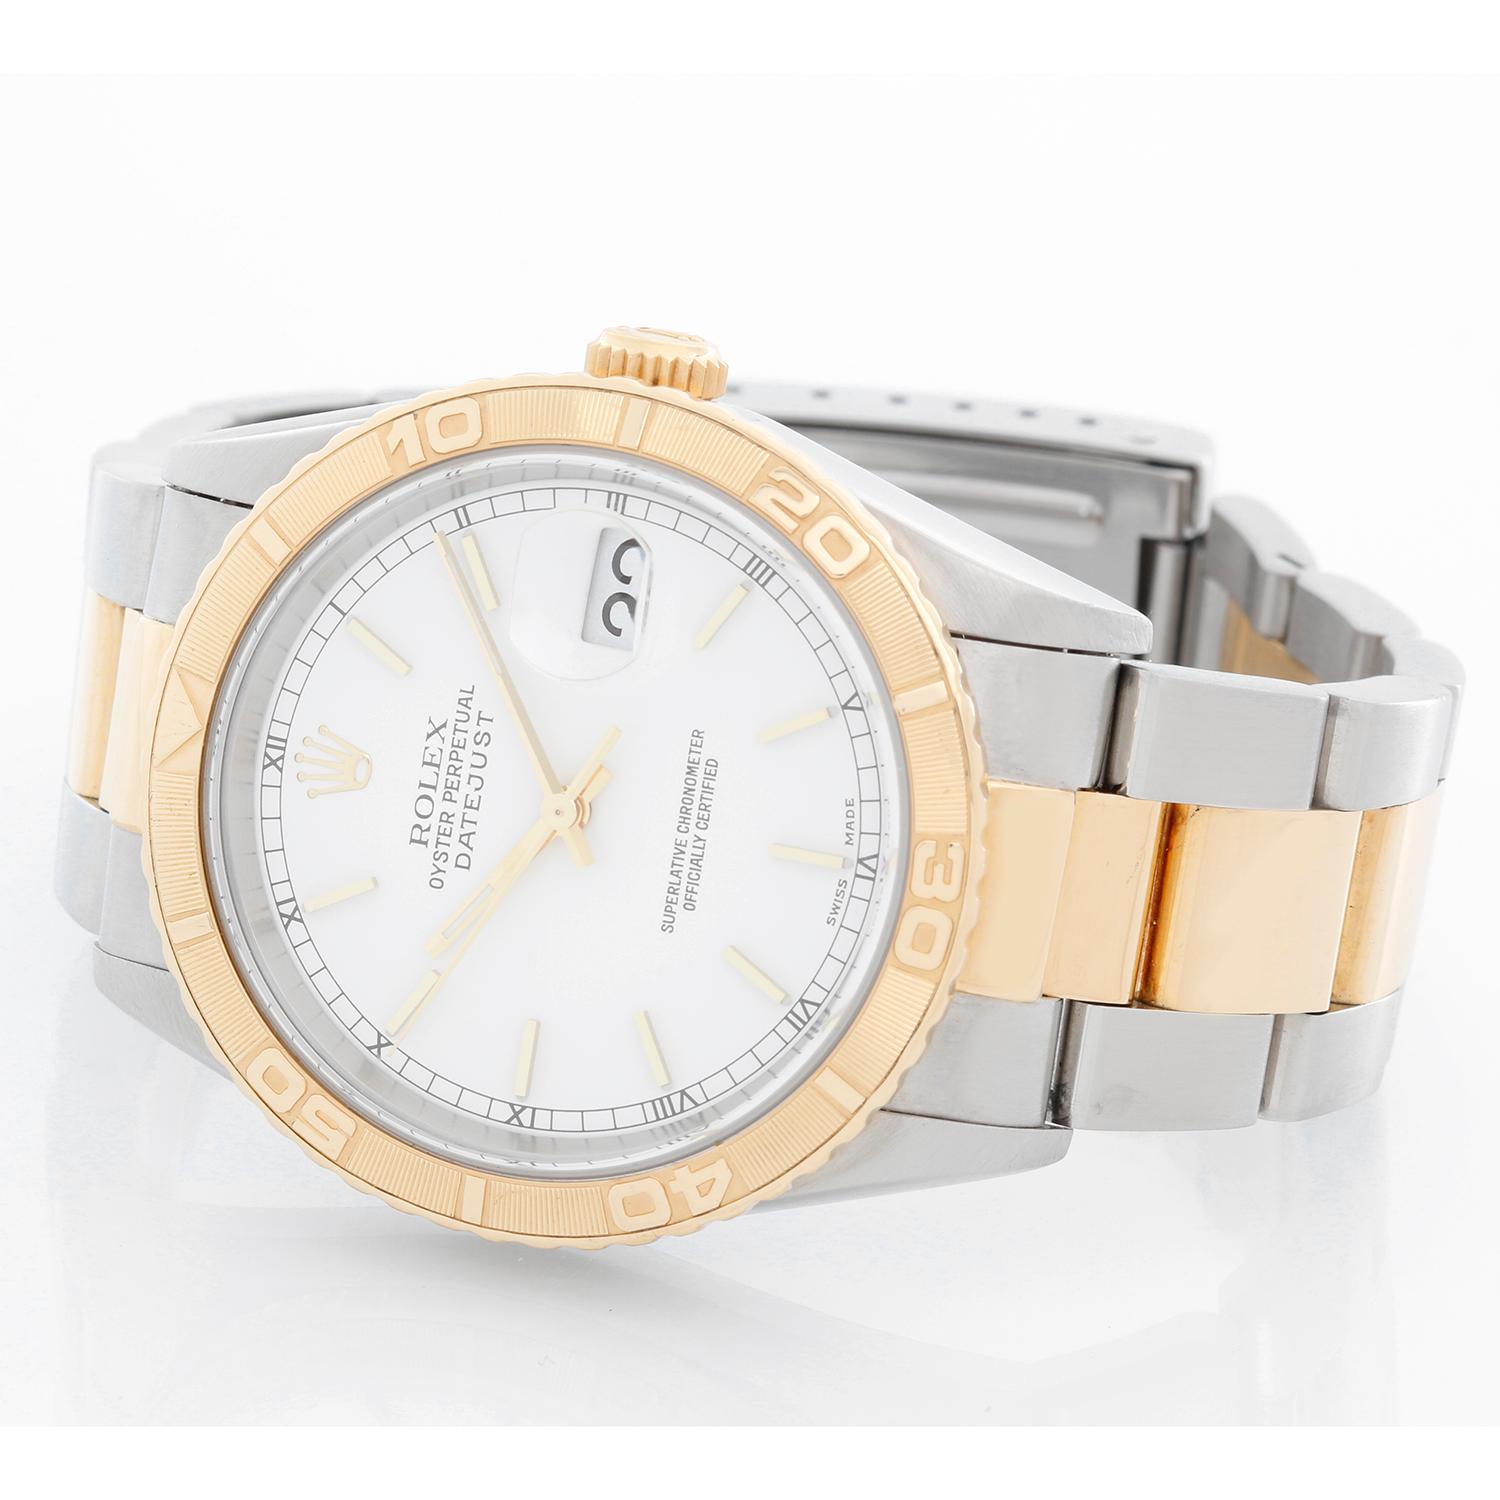 Rolex Turnograph Men's 2-Tone Watch 16263 -  Automatic winding, Quickset, sapphire crystal. Stainless steel case with 18k yellow gold bezel (36mm diameter). White dial with gold stick markers. Stainless steel and 18k yellow gold Jubilee bracelet.